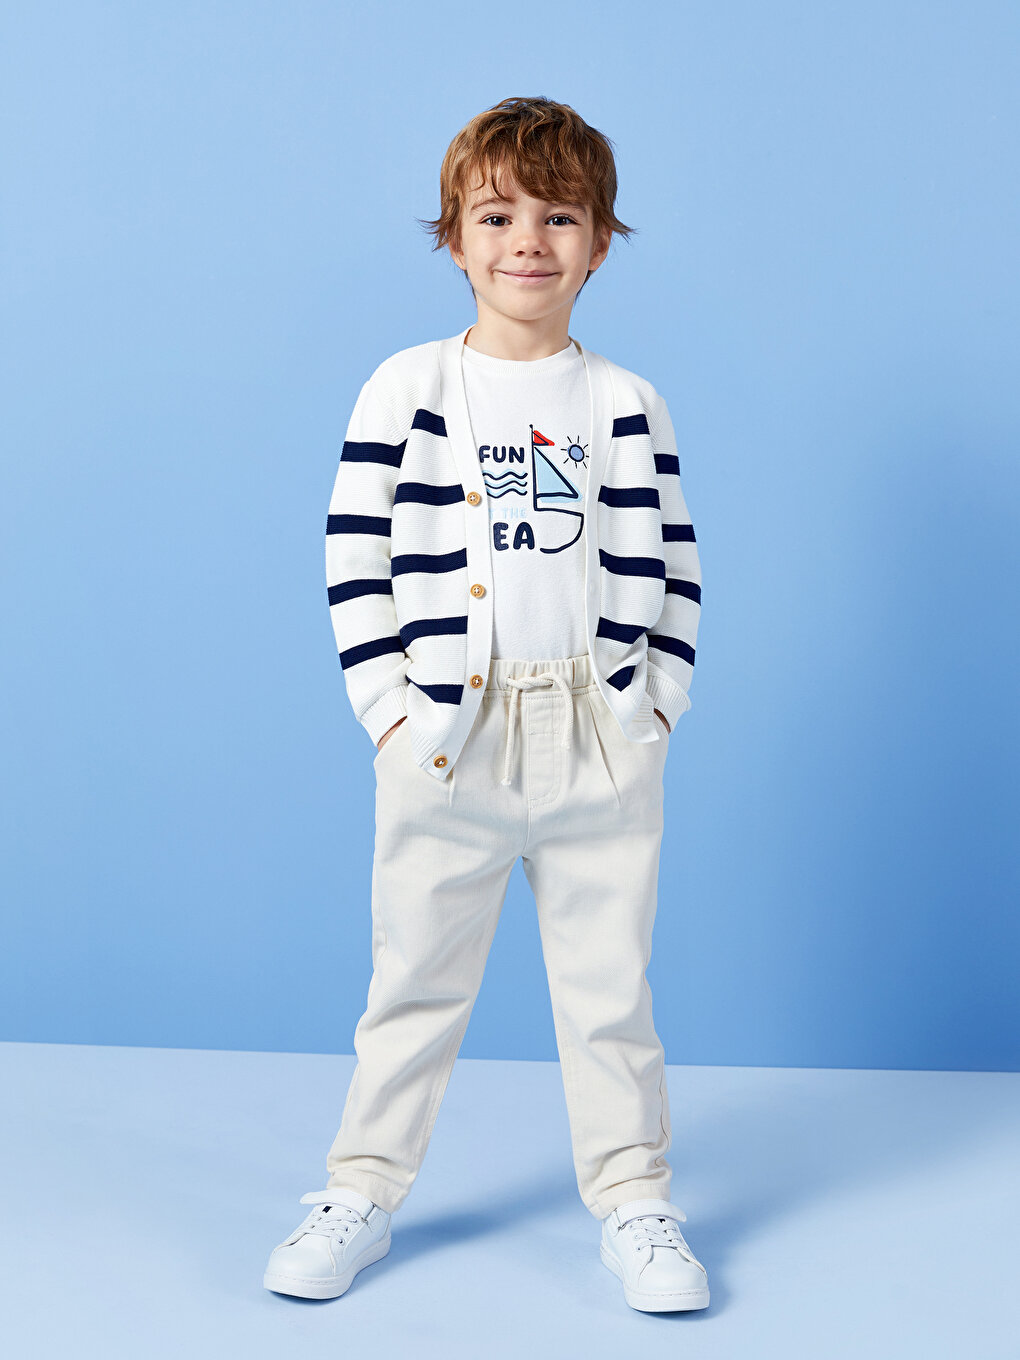 Small Baby Boy White Trousers Sitting Stock Photo 390989404 | Shutterstock